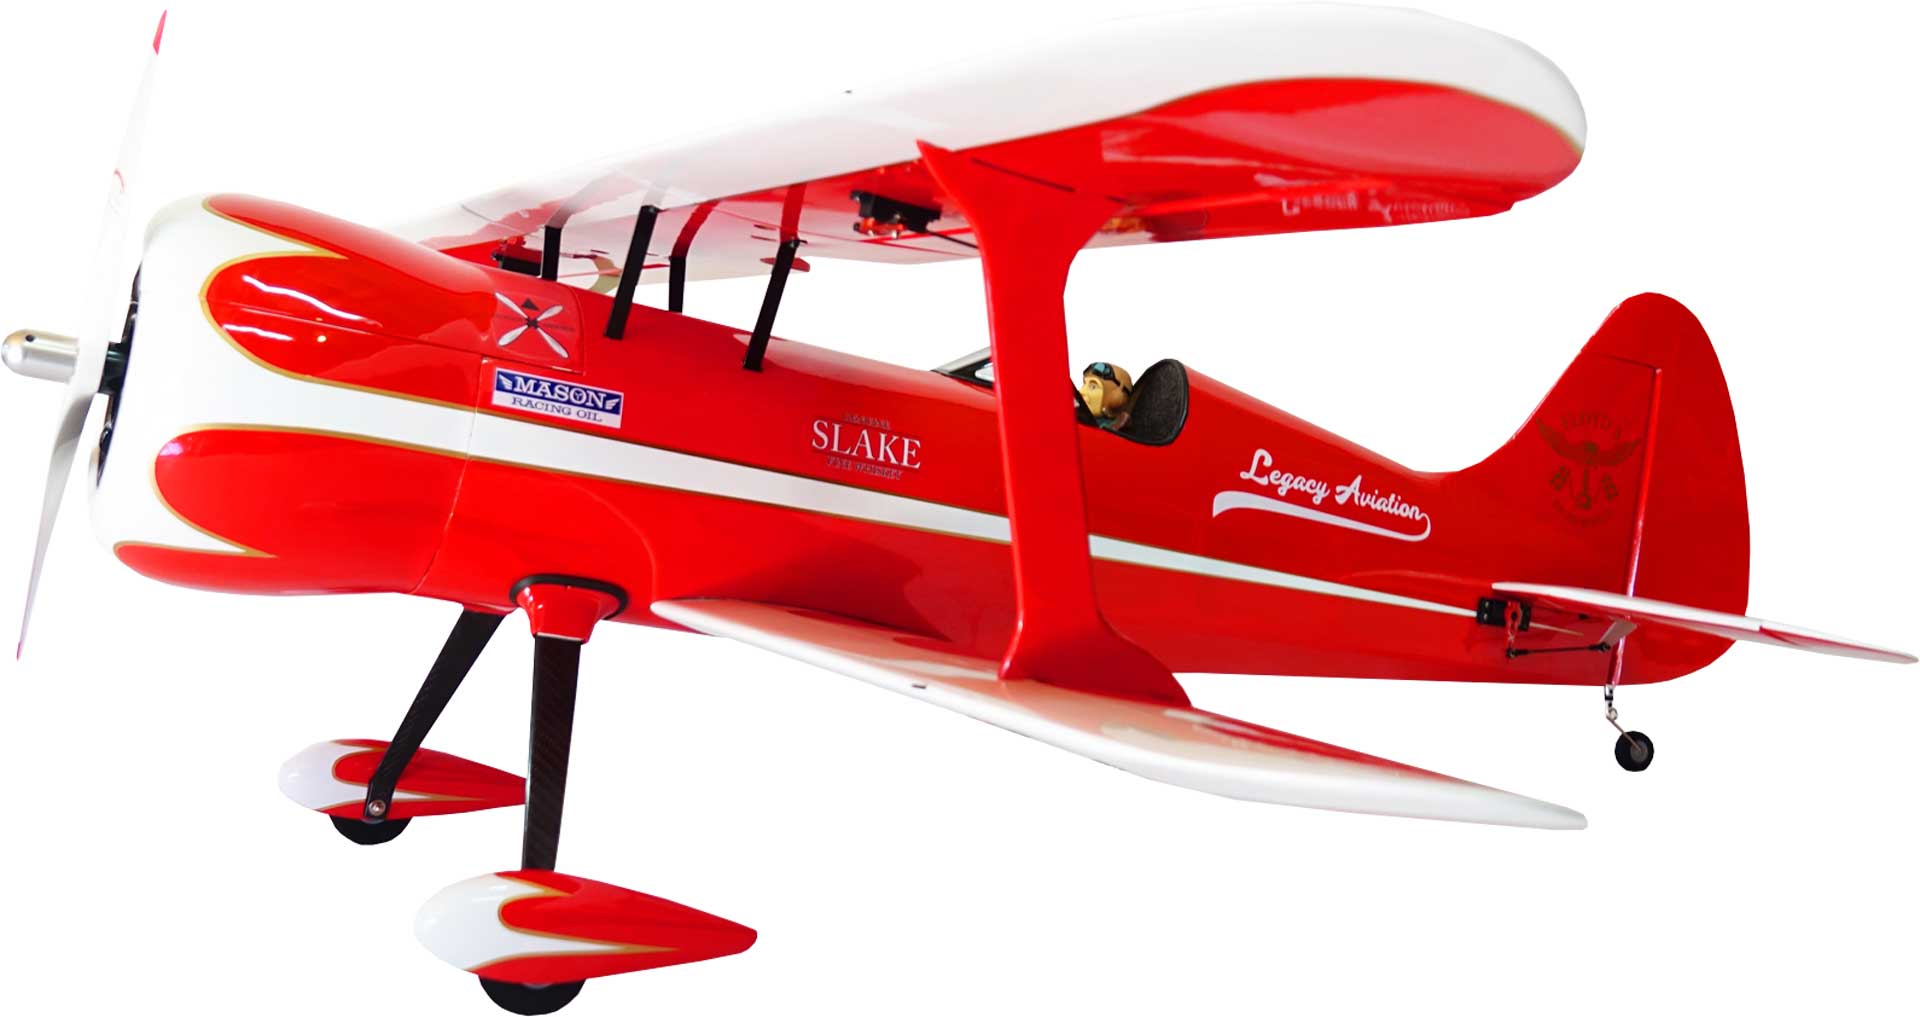 LEGACY AVIATION Muscle Bipe 54" Red ARF Red biplane